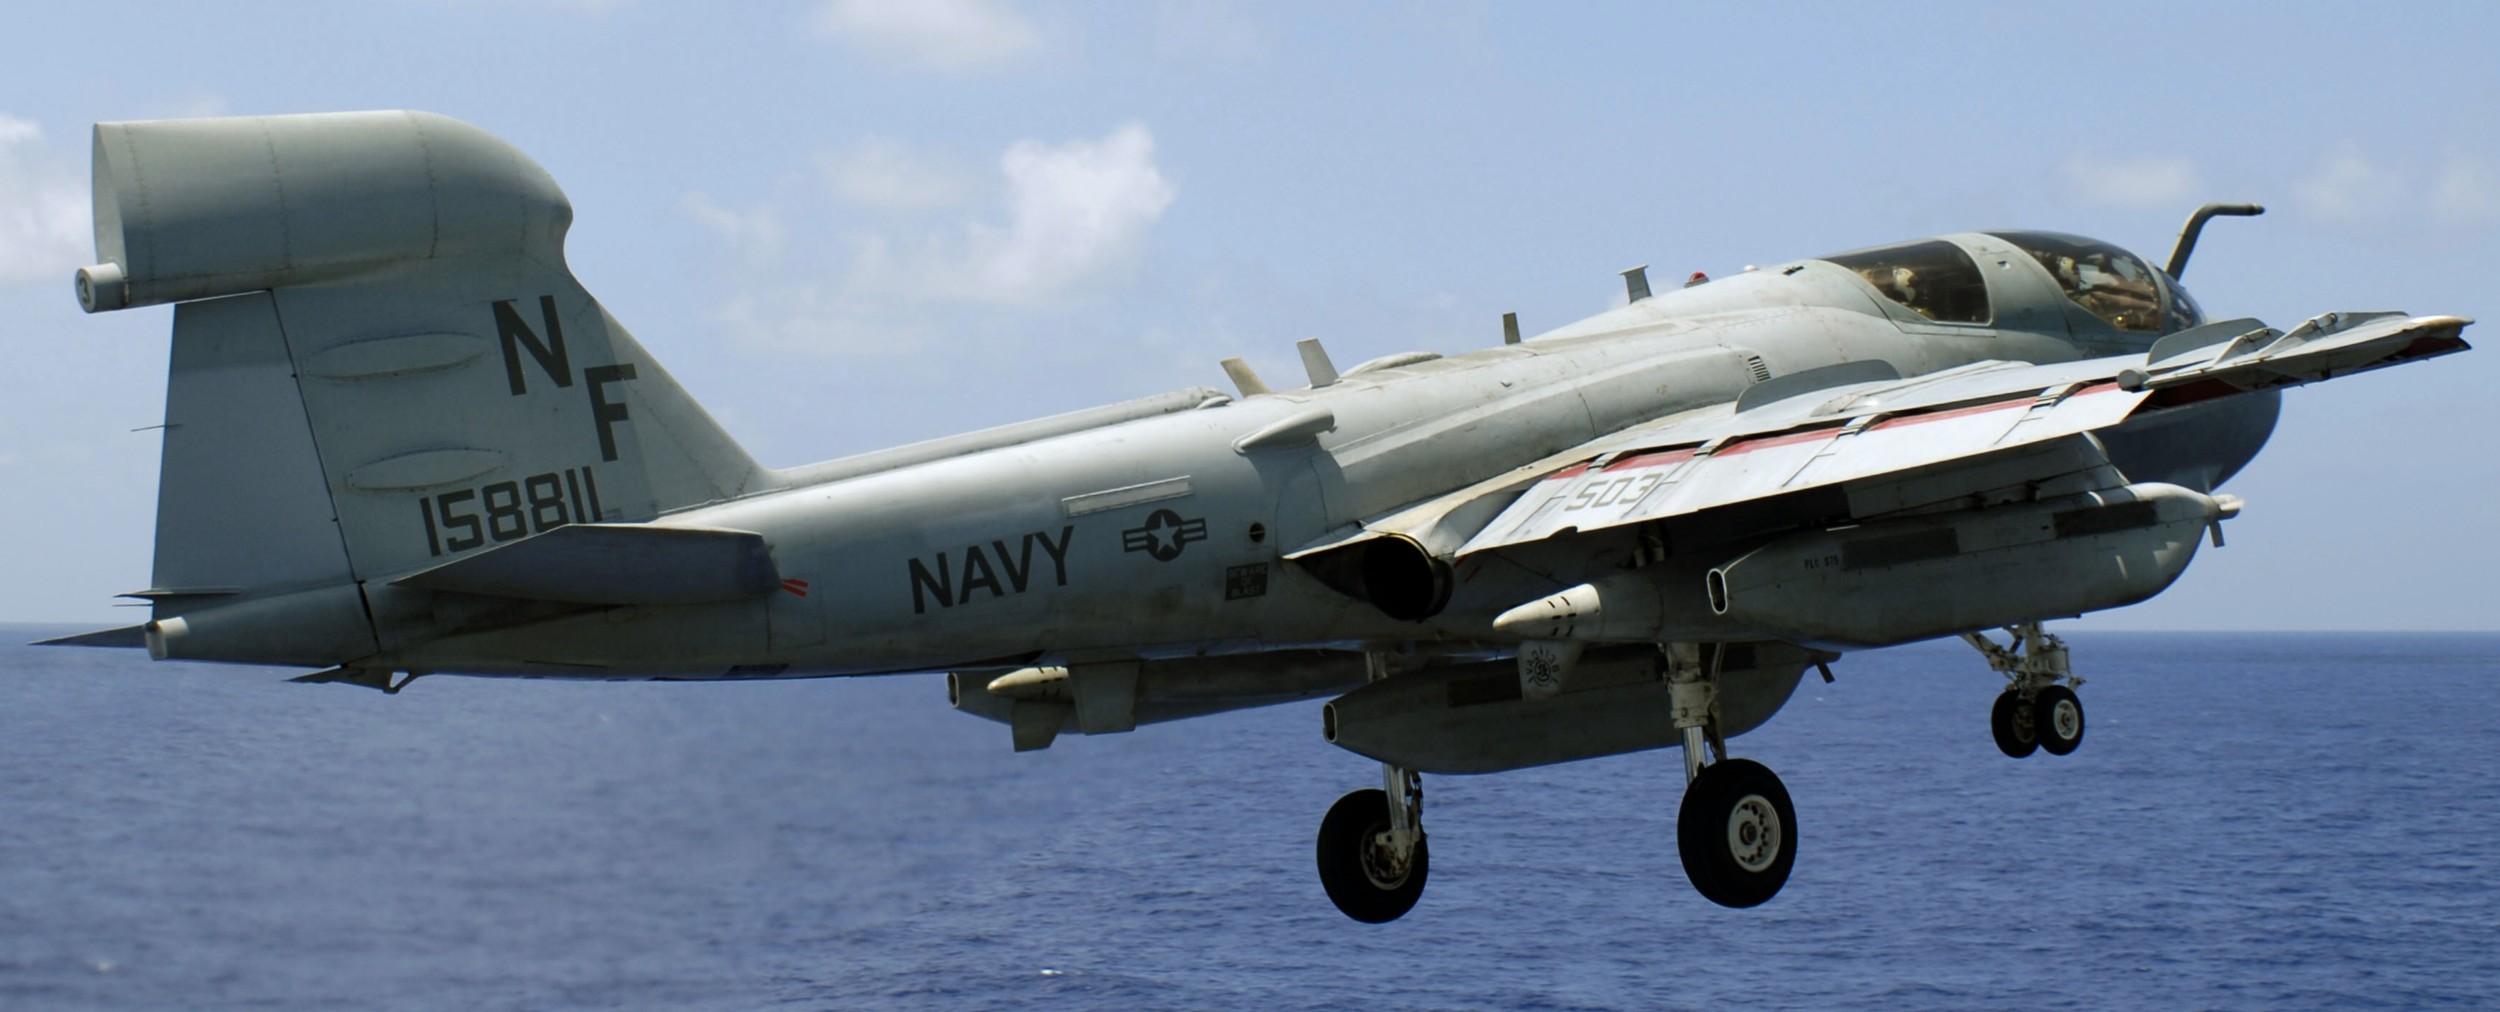 vaq-136 gauntlets electronic attack squadron vaqron us navy ea-6b prowler carrier air wing cvw-5 uss kitty hawk cv-63 70